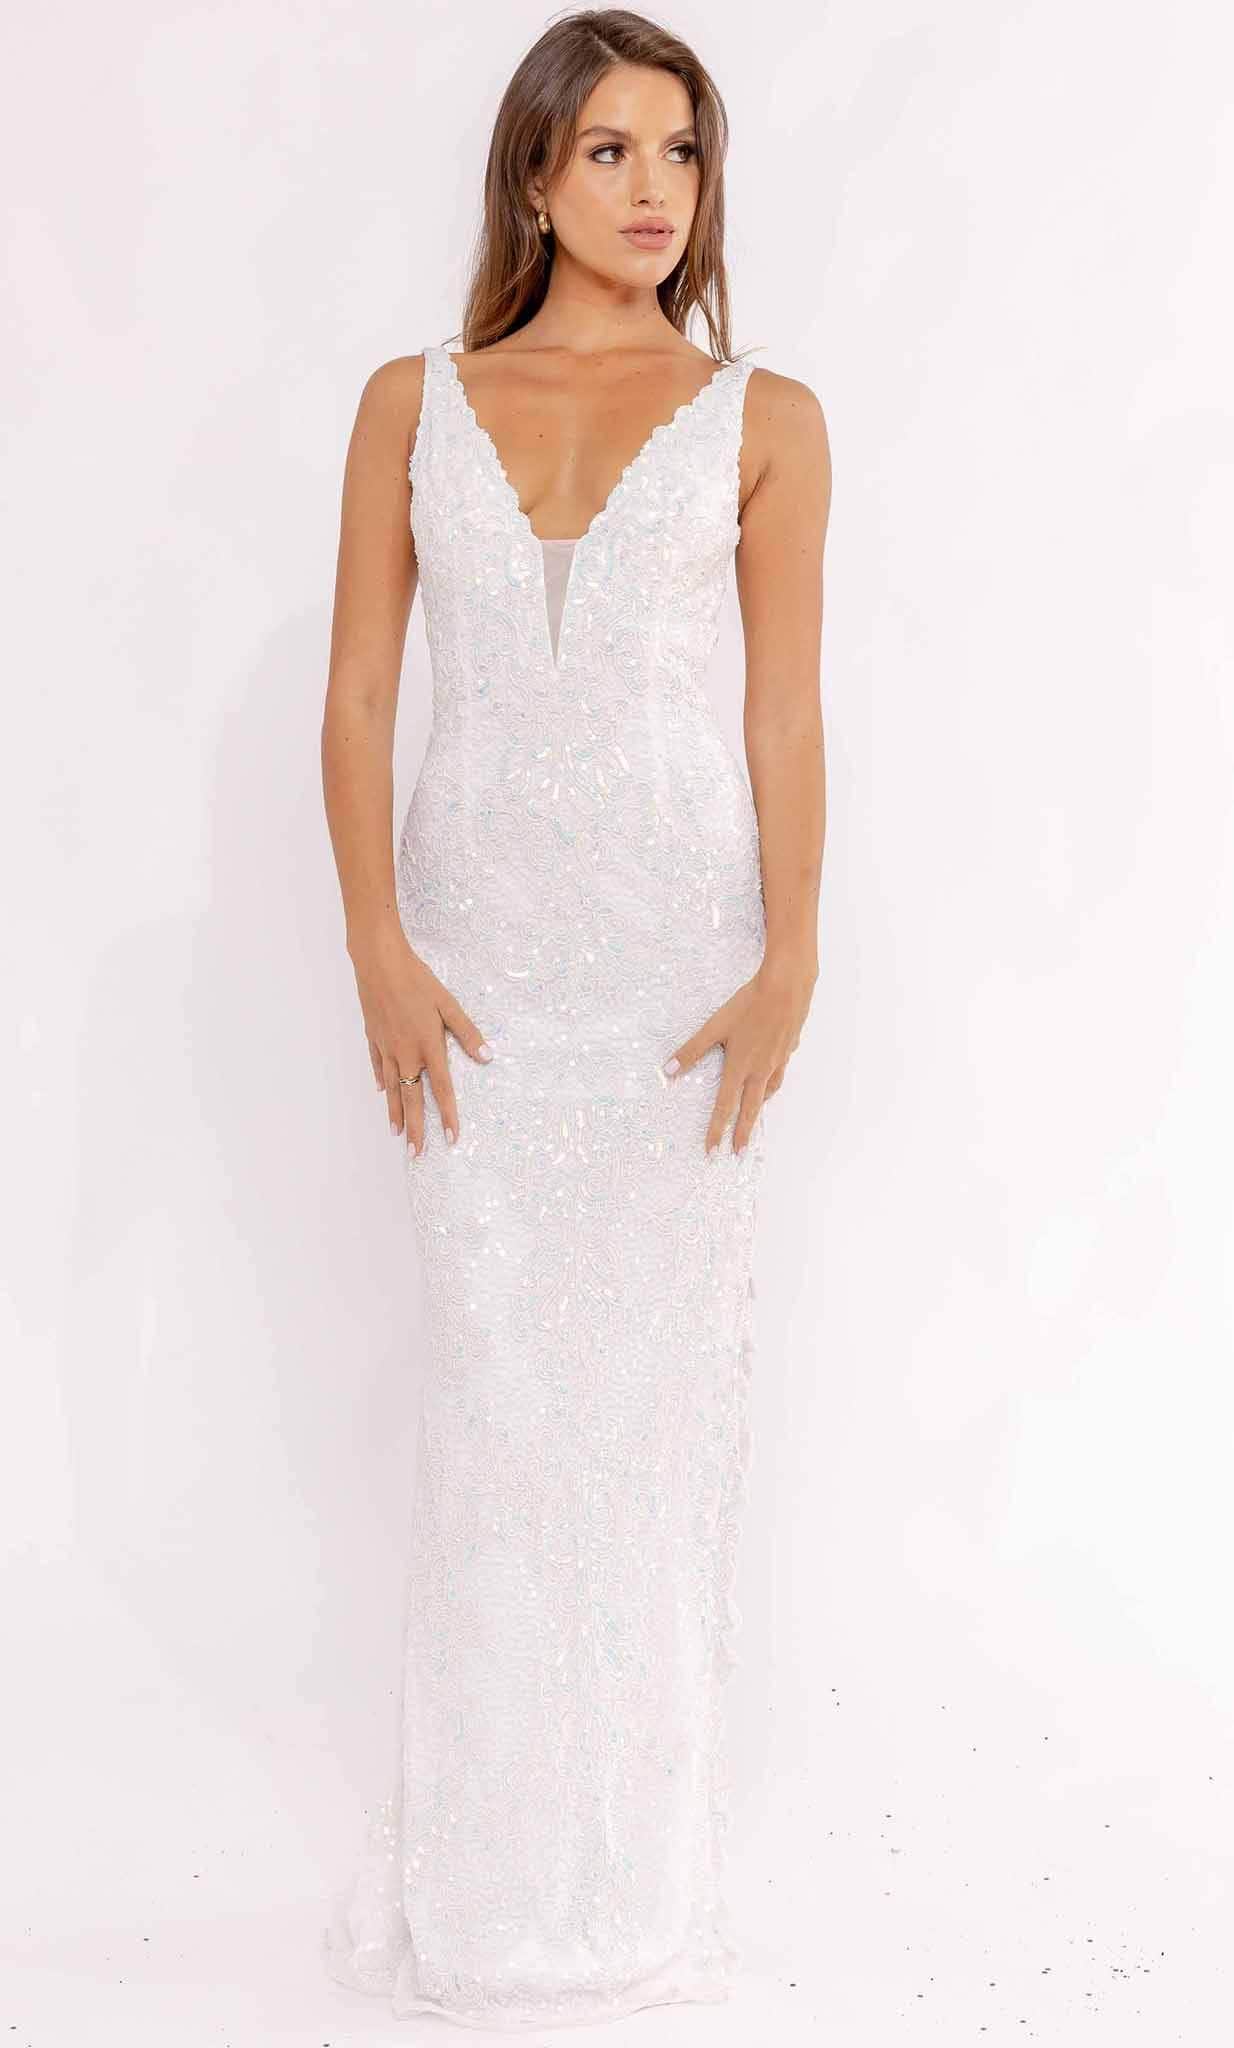 Image of Primavera Couture 3953 - Plunging Embellished Evening Gown